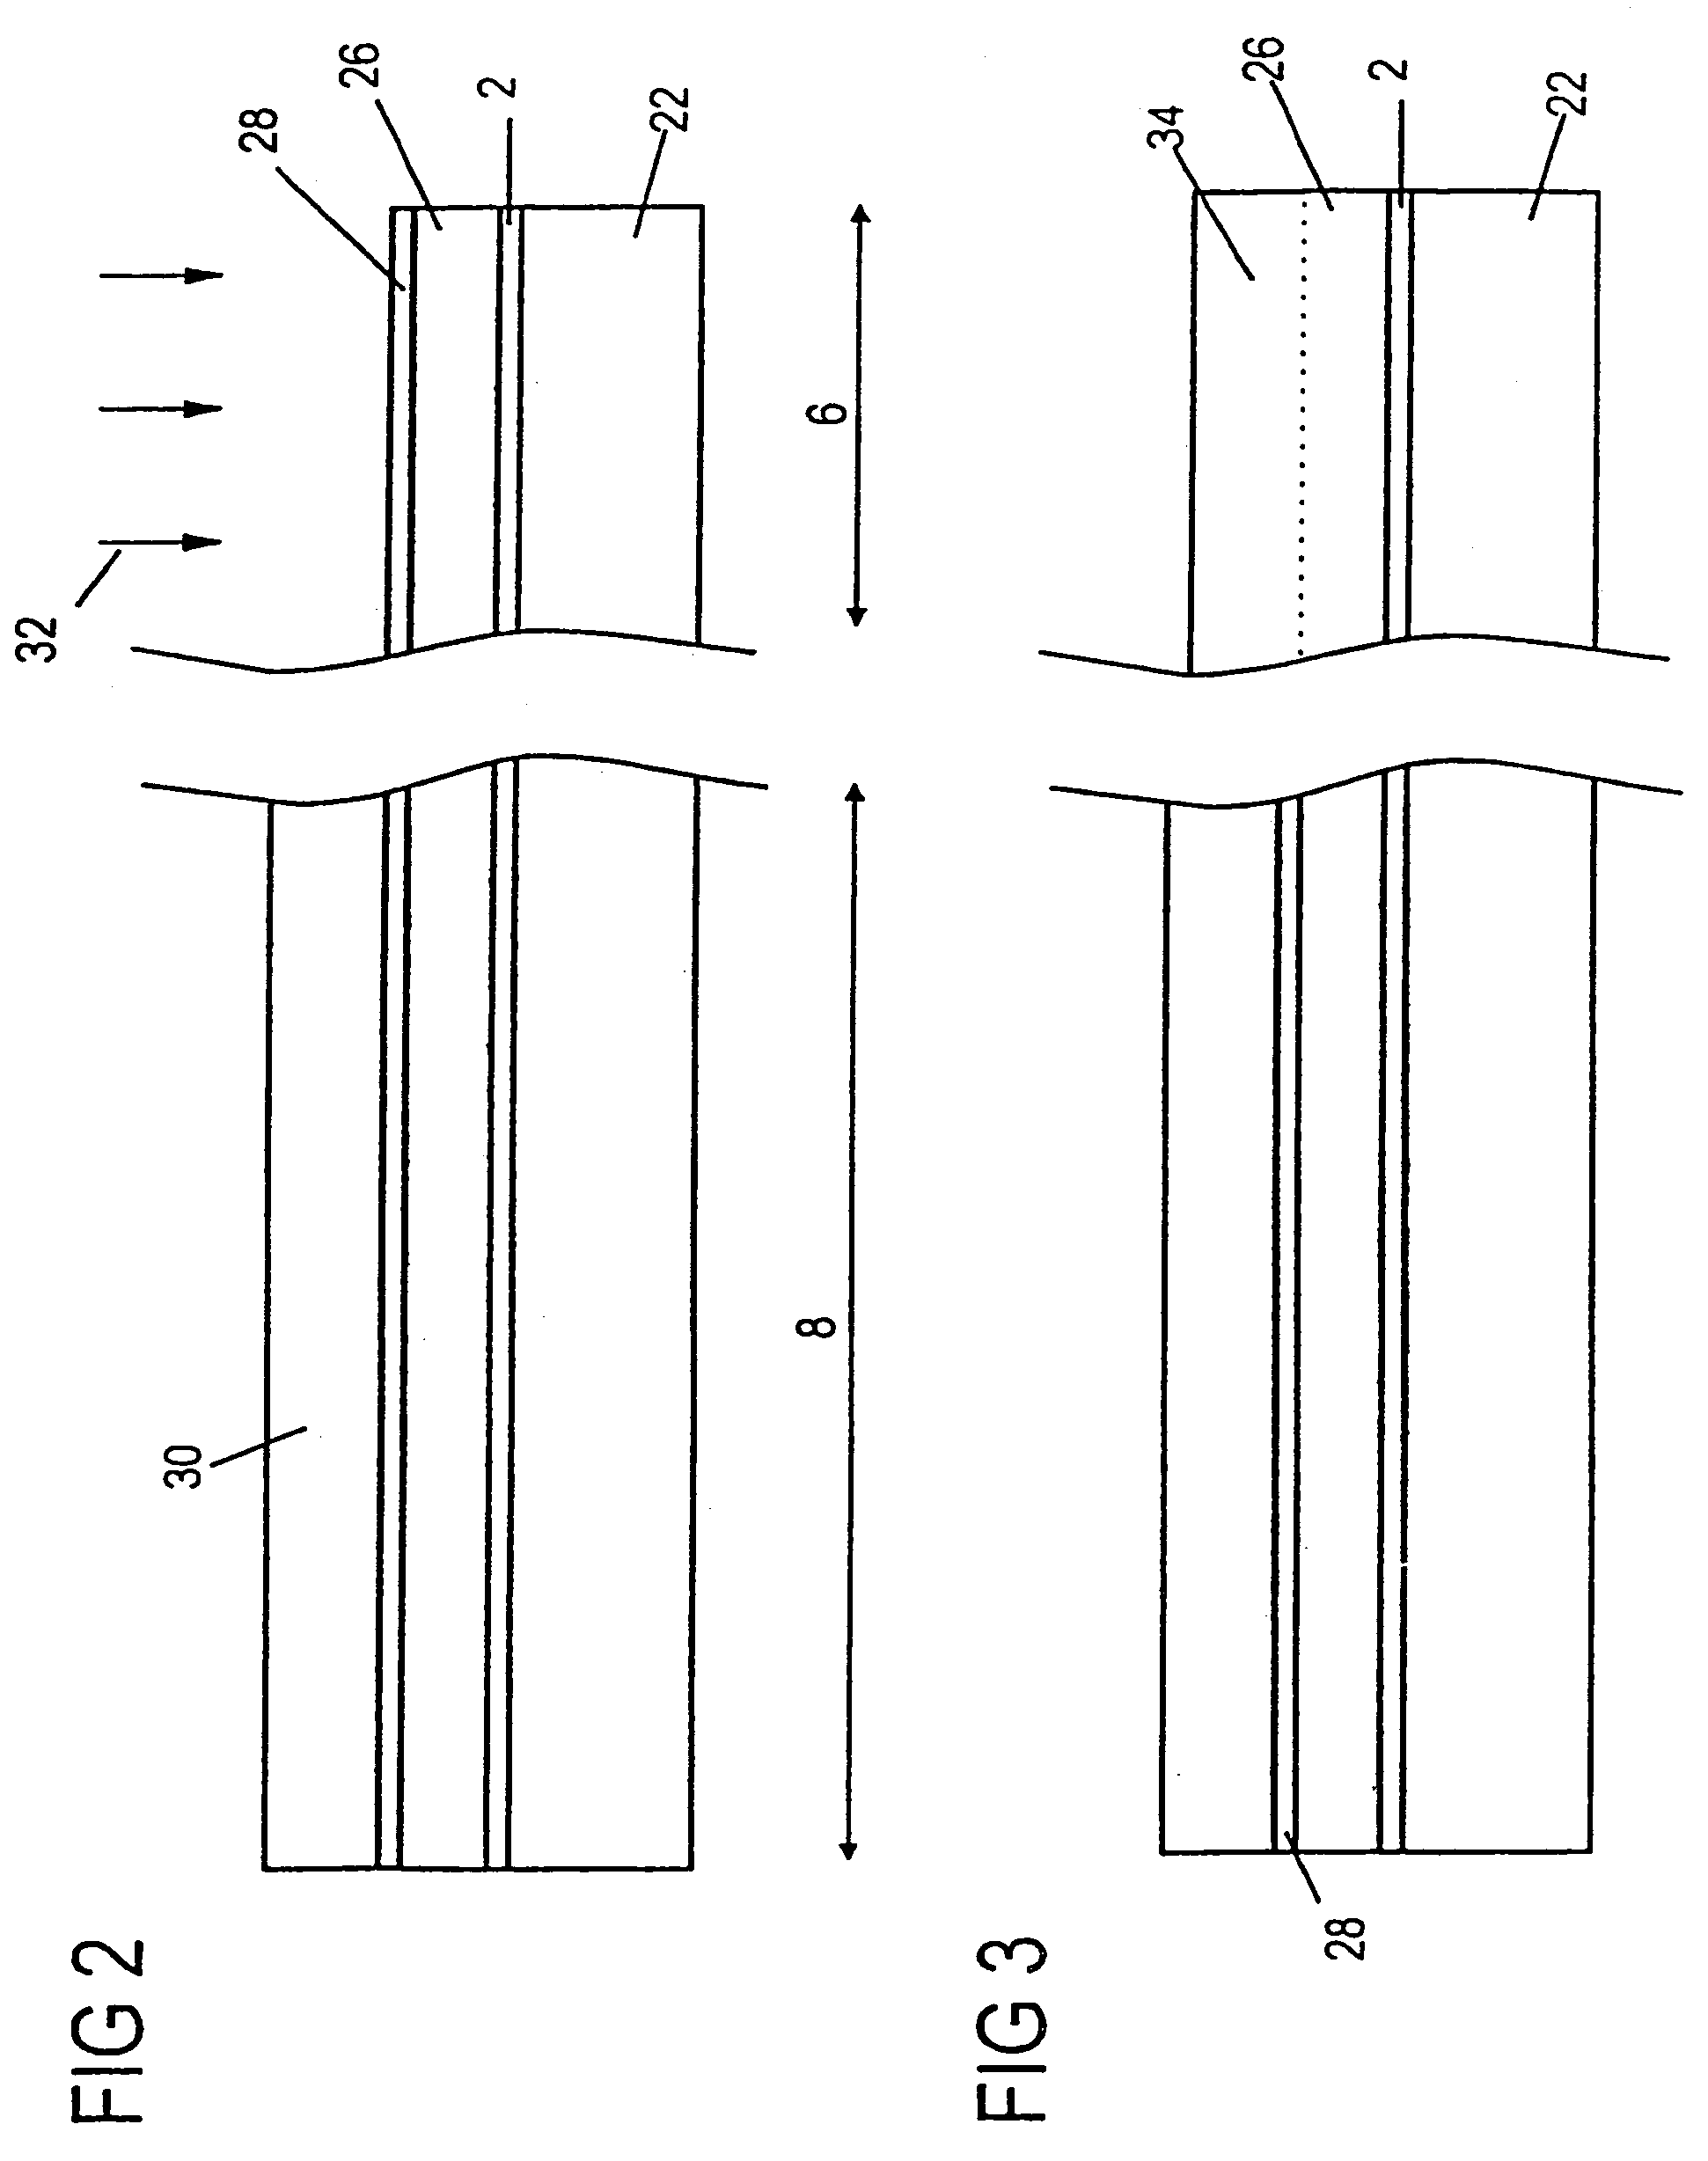 Method for fabricating a semiconductor product with a memory area and a logic area